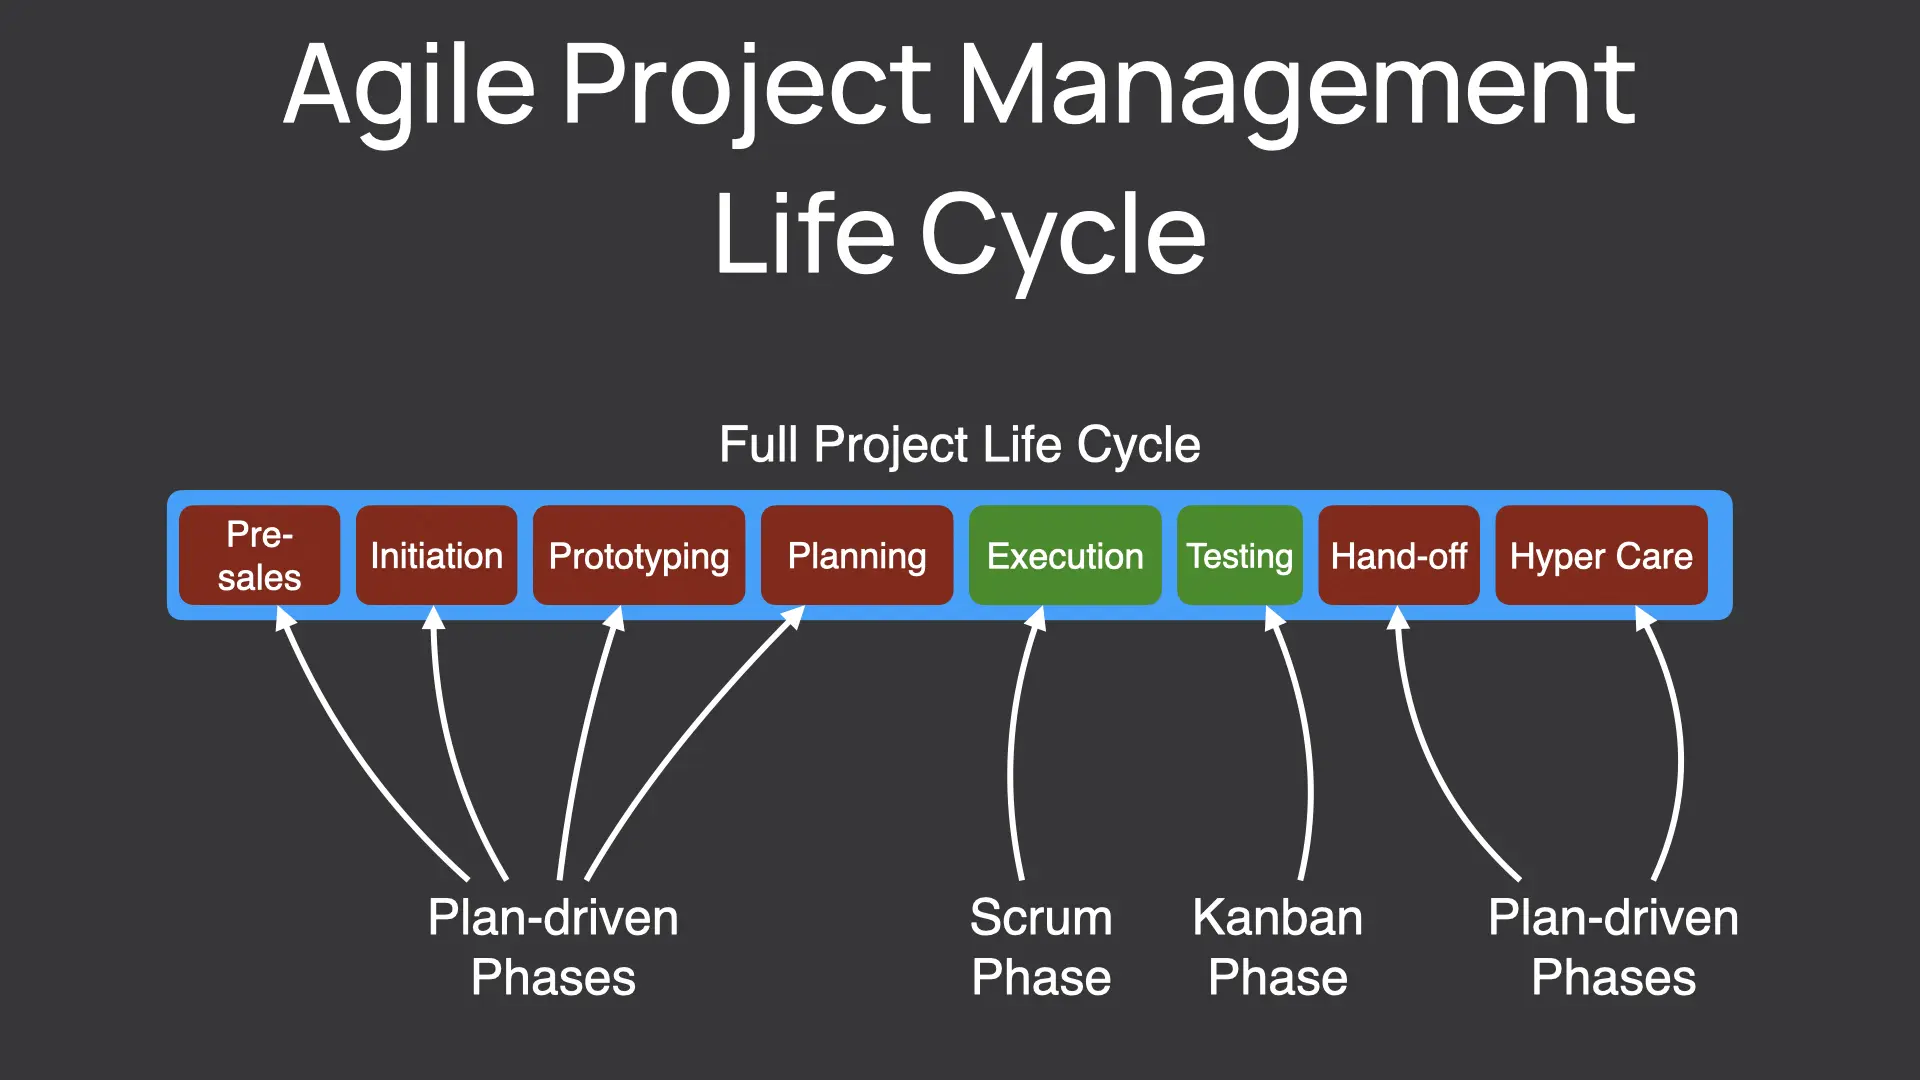 A diagram that shows agile project life cycle and main phases